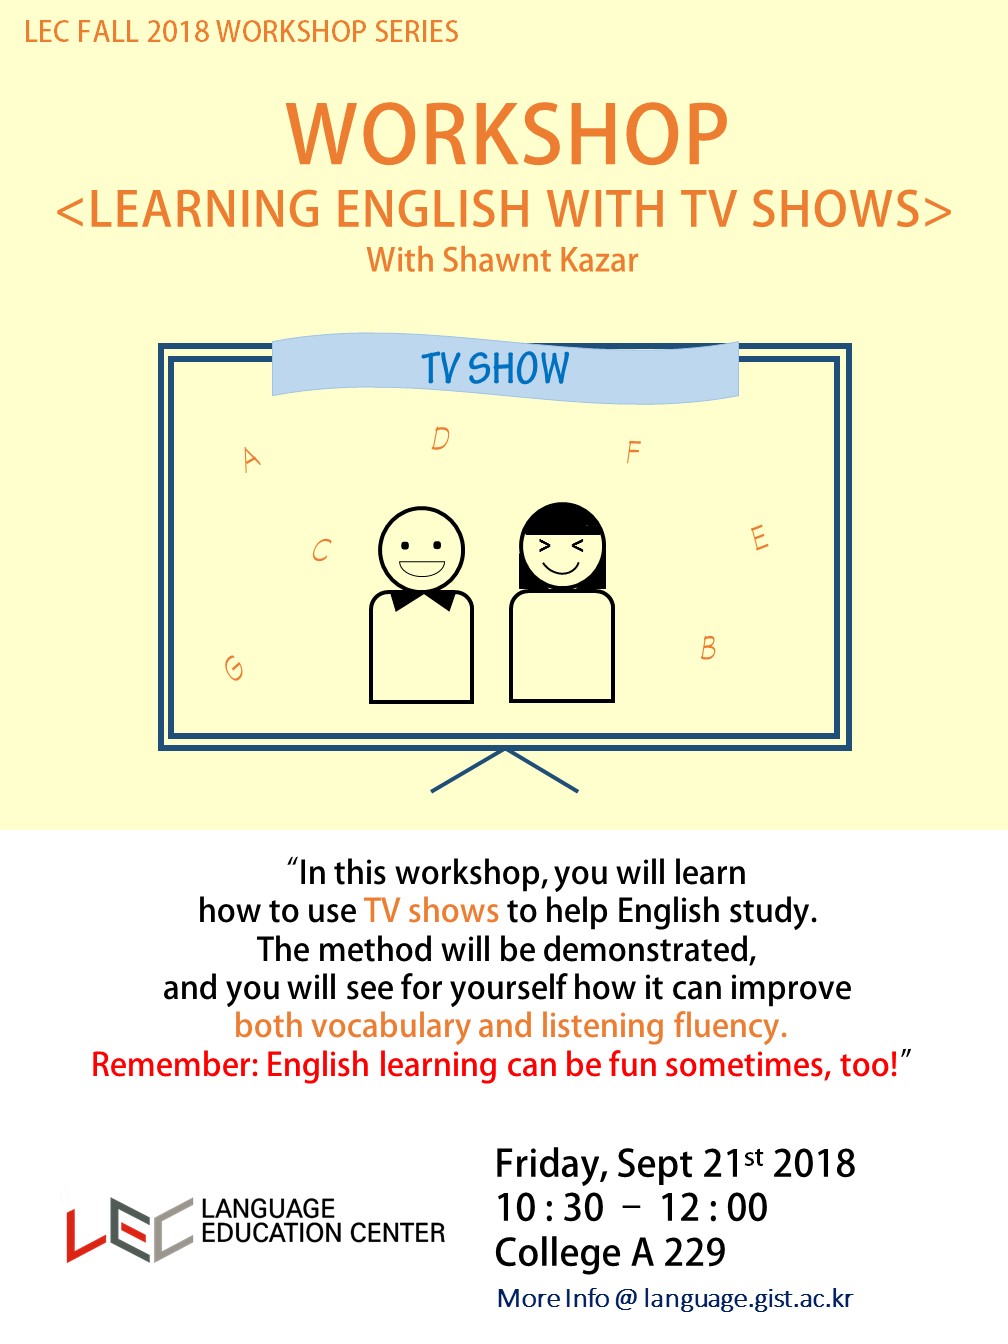 Learning English with TV Shows_9.21..JPG